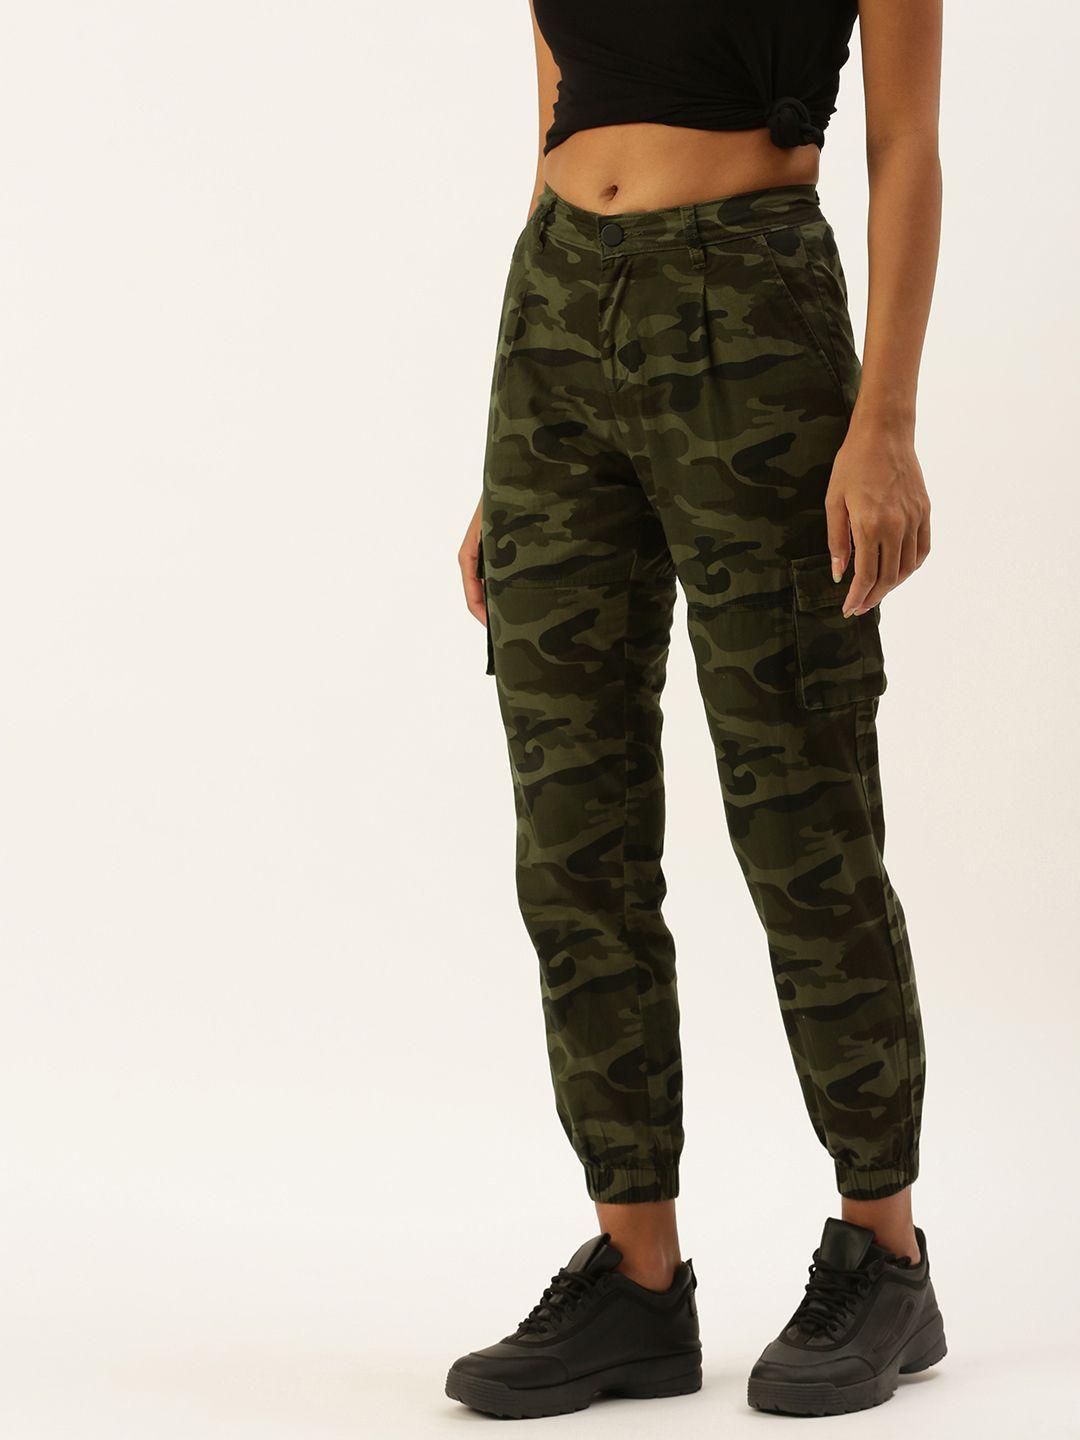 ivoc women olive green camouflage printed joggers